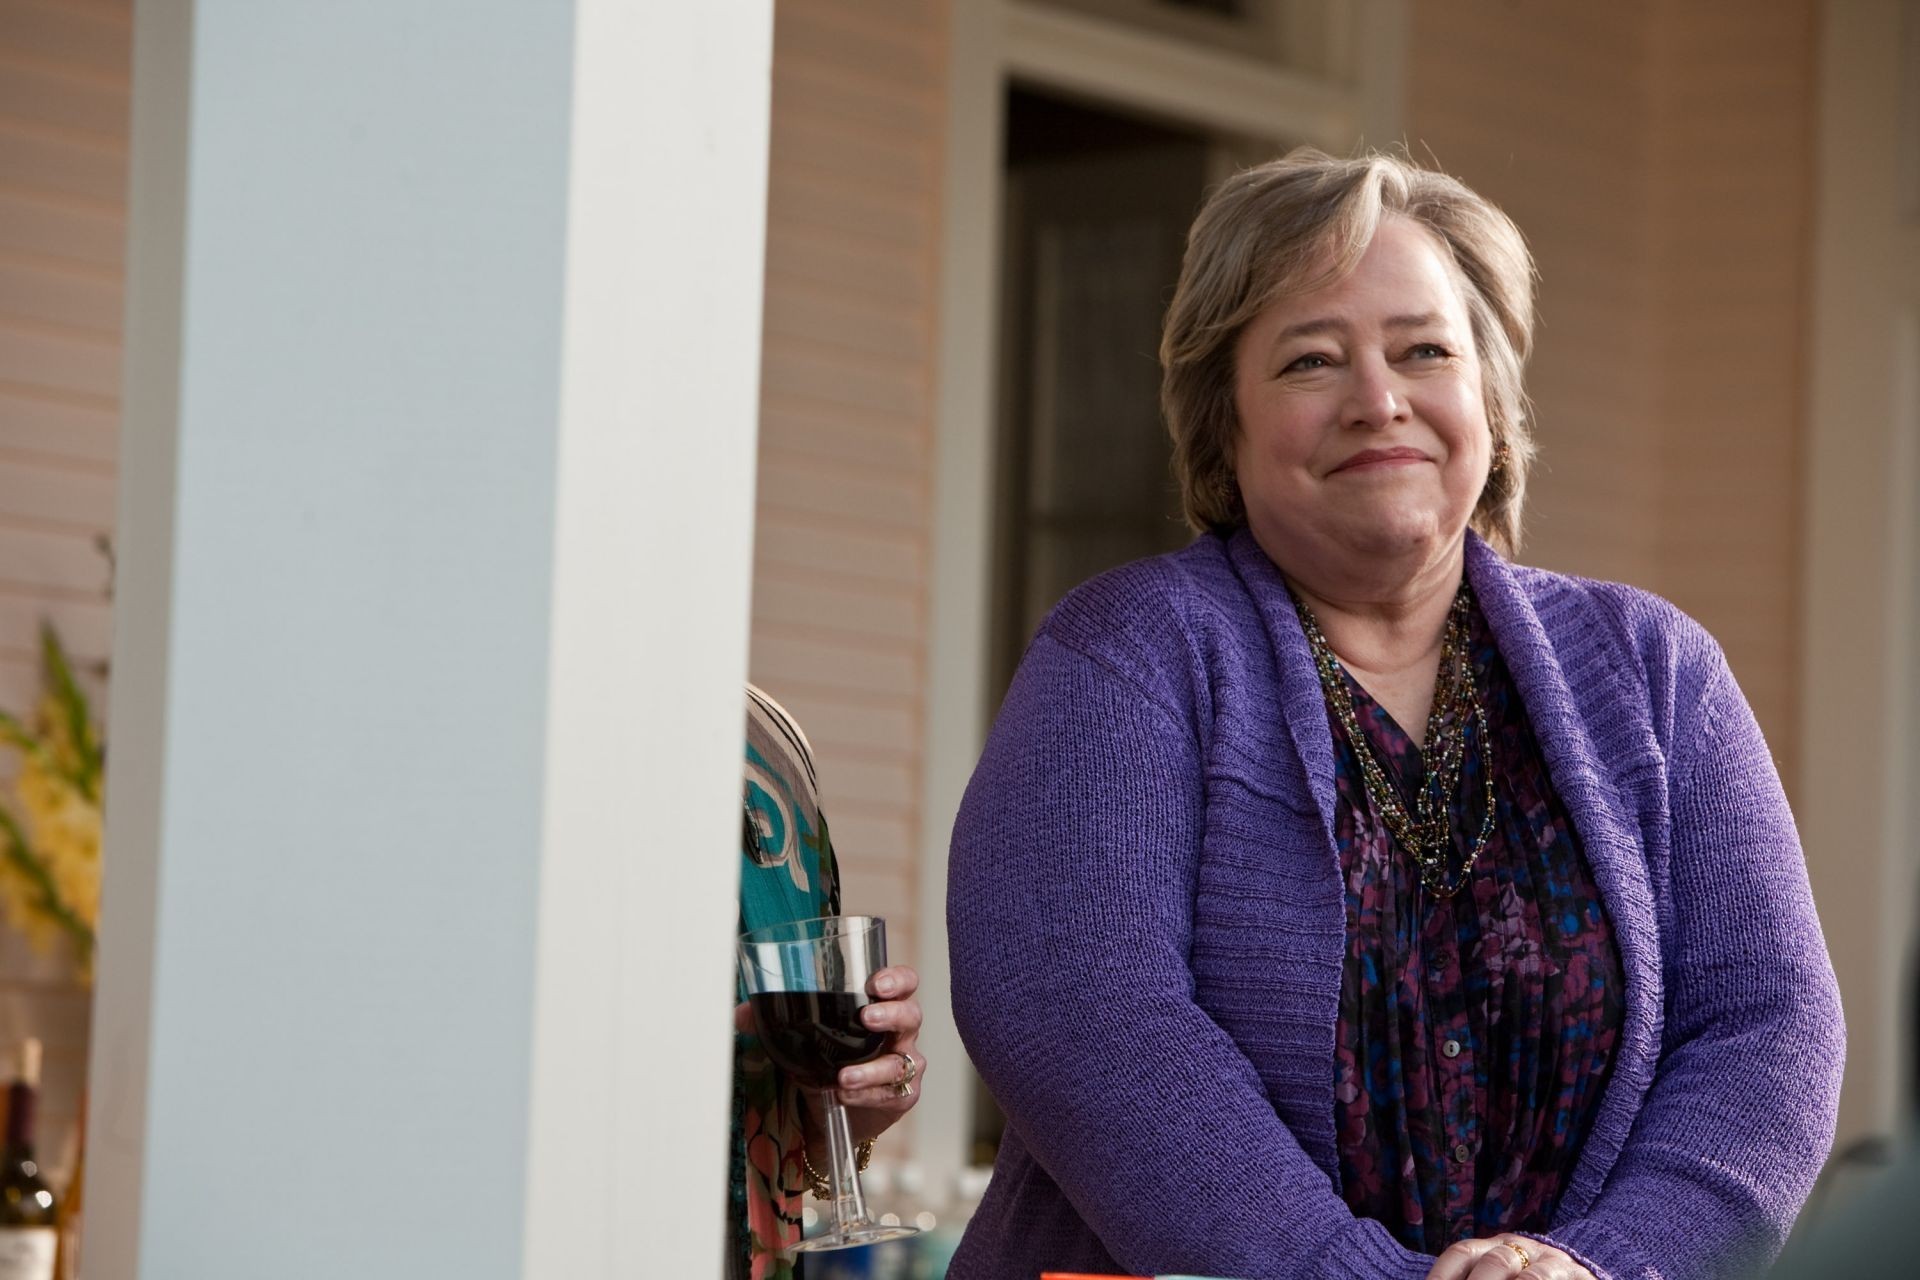 Kathy Bates stars as Beverly Corbett in Millennium Entertainment's A Little Bit of Heaven (2012). Photo credit by Patti Perret.